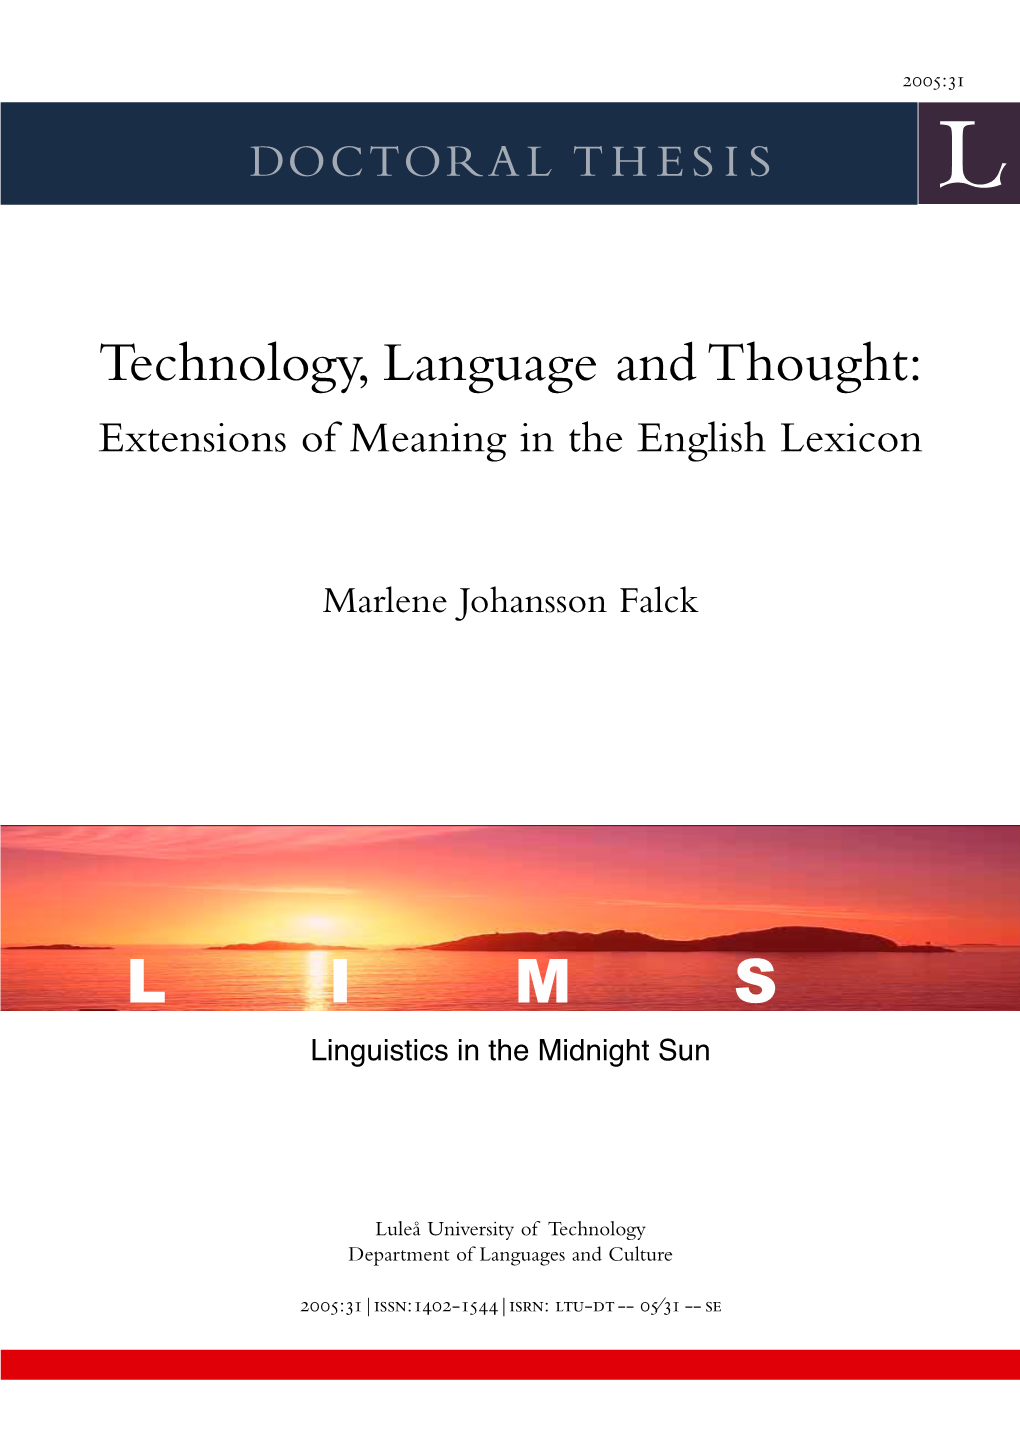 Technology, Language and Thought: Extensions of Meaning in the English Lexicon